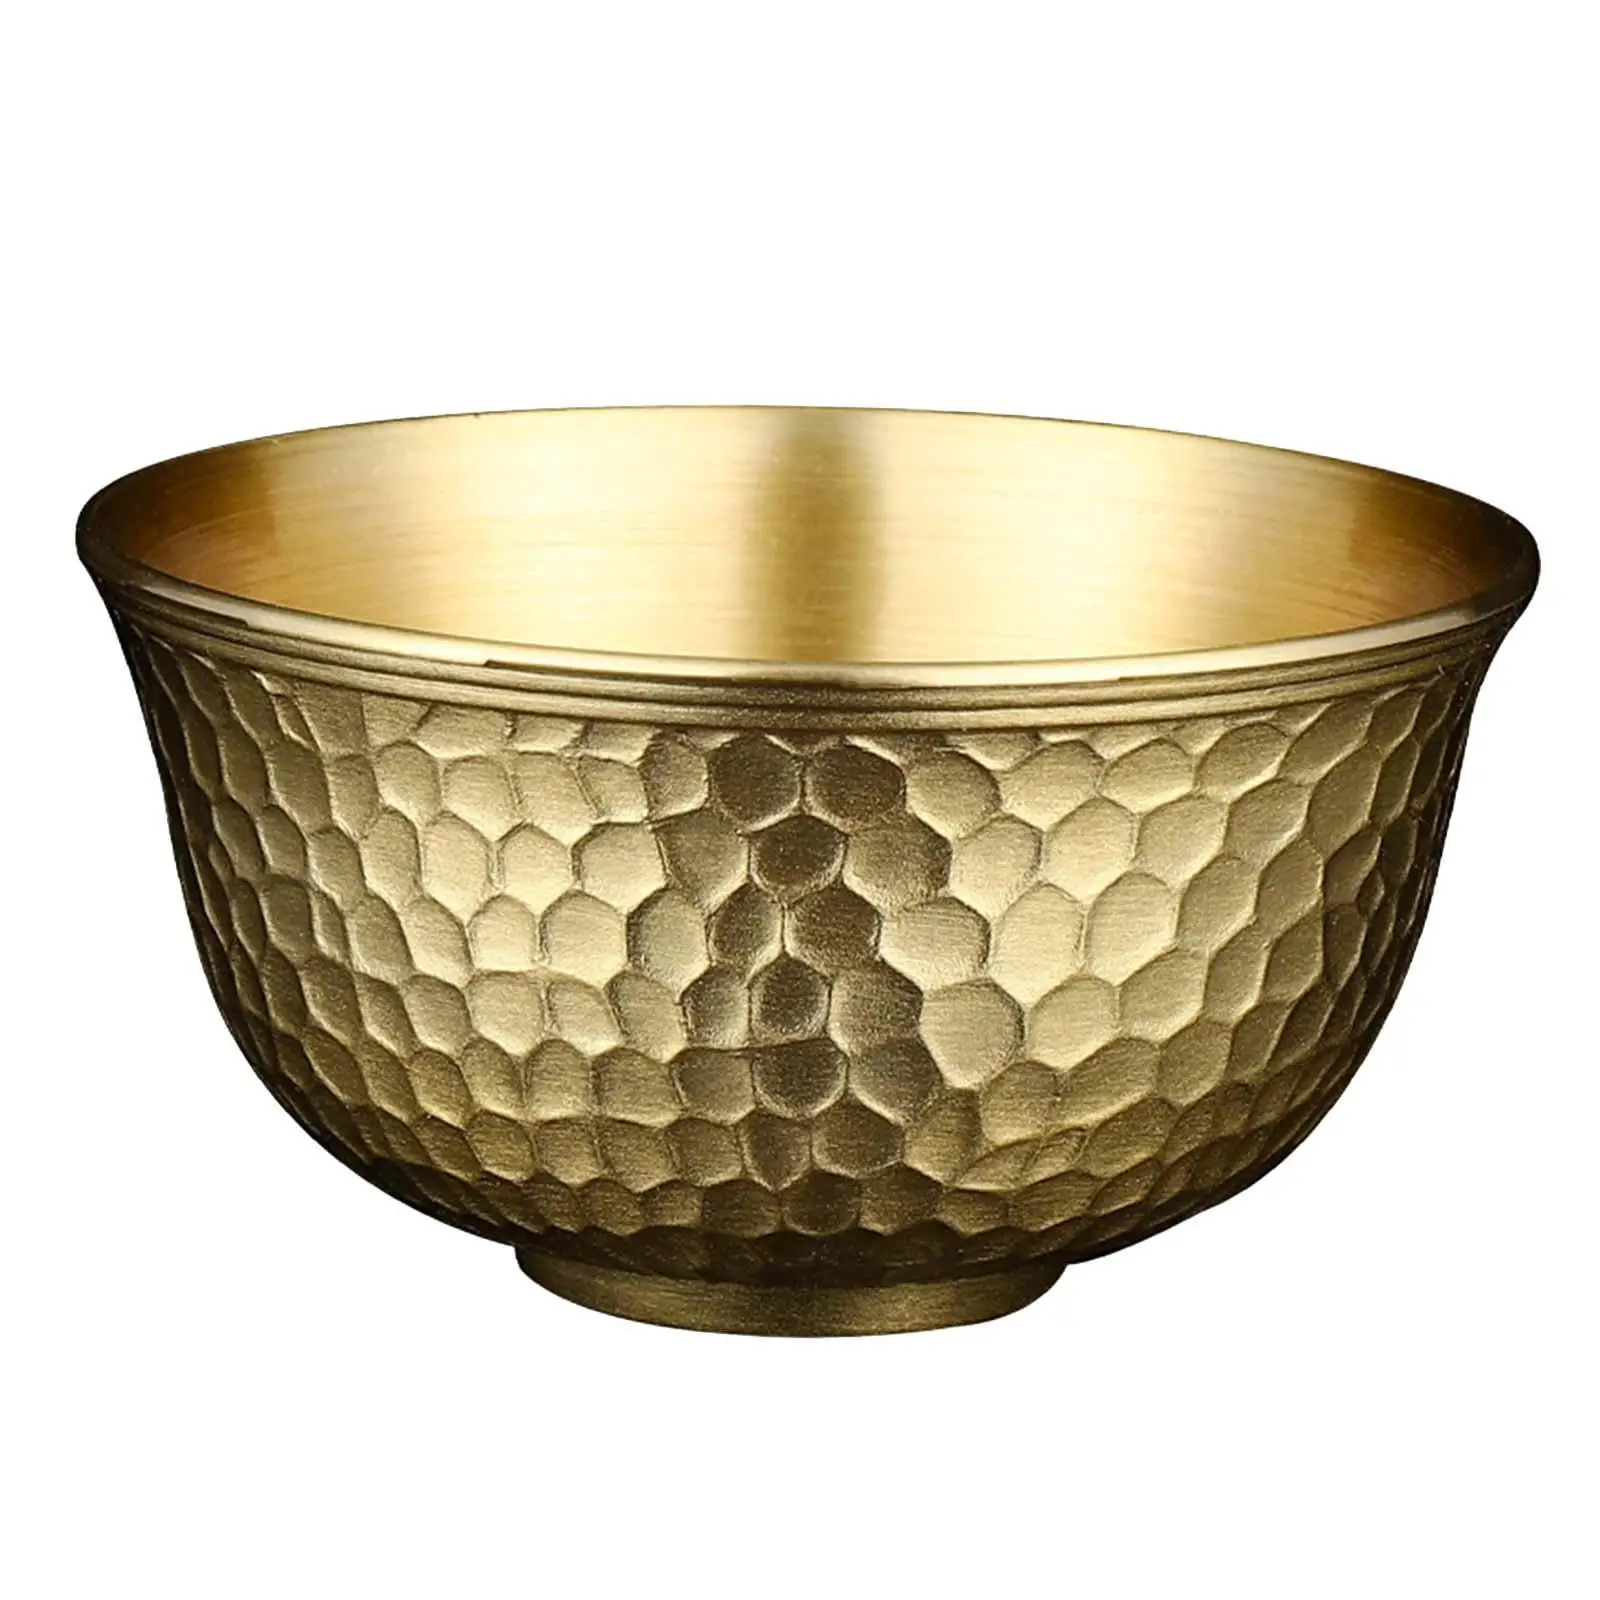 

Treasure Bowl 2.48'' Diameter Heavy Duty Classic Novelty Ornament Copper Mixing Bowl for Macaroni Salad Pasta Steamed Vegetables